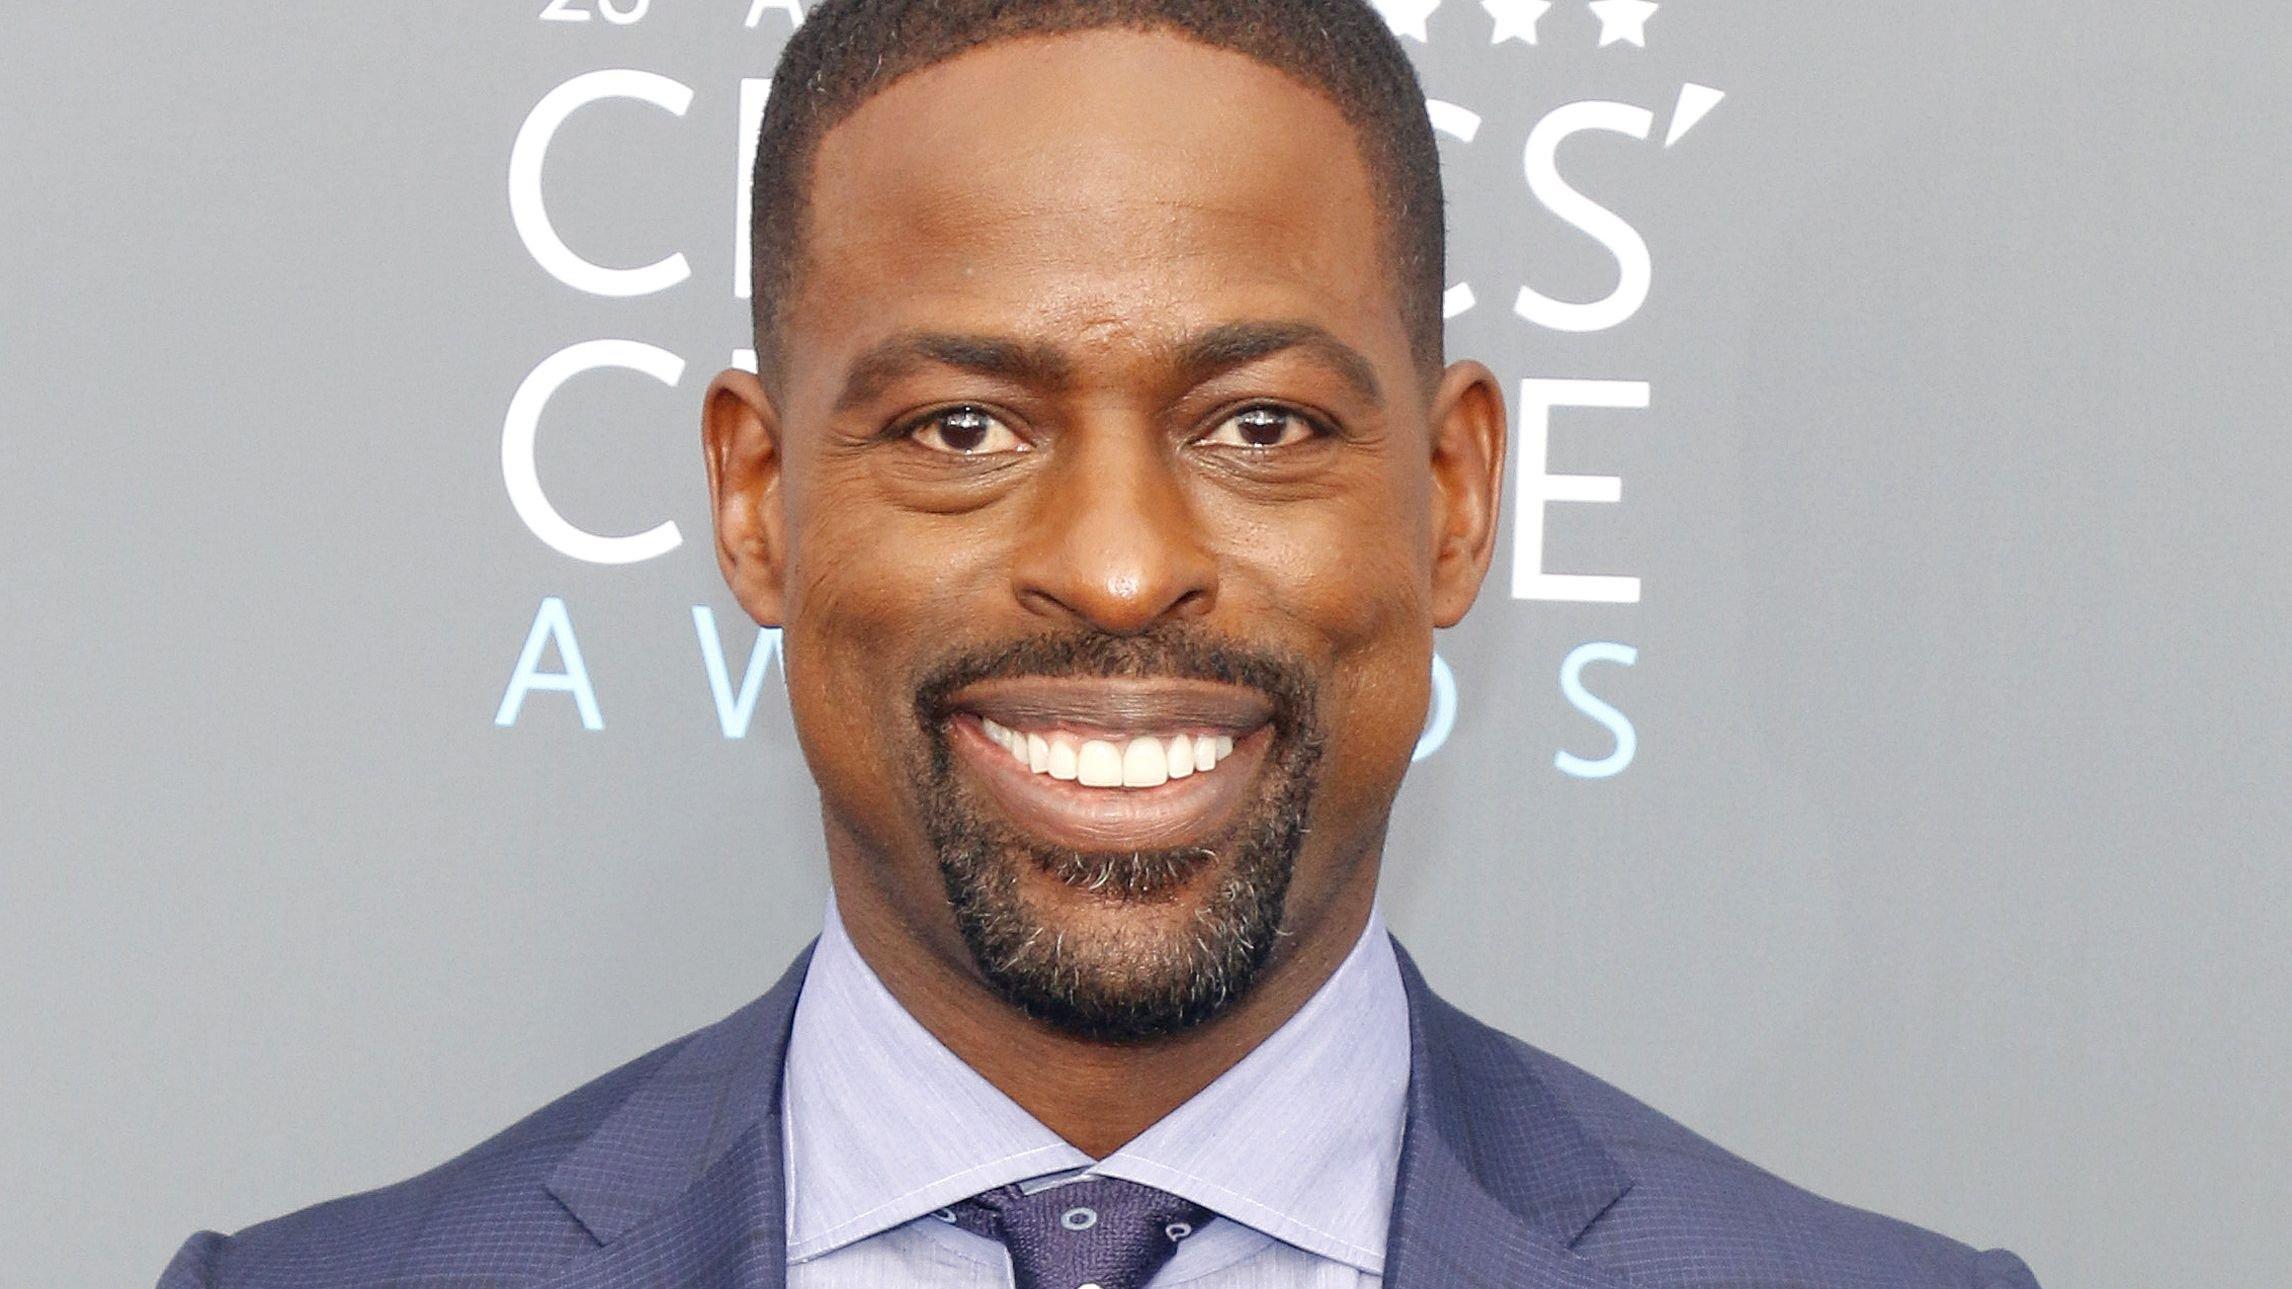 Sterling K Brown in blue suit and tie